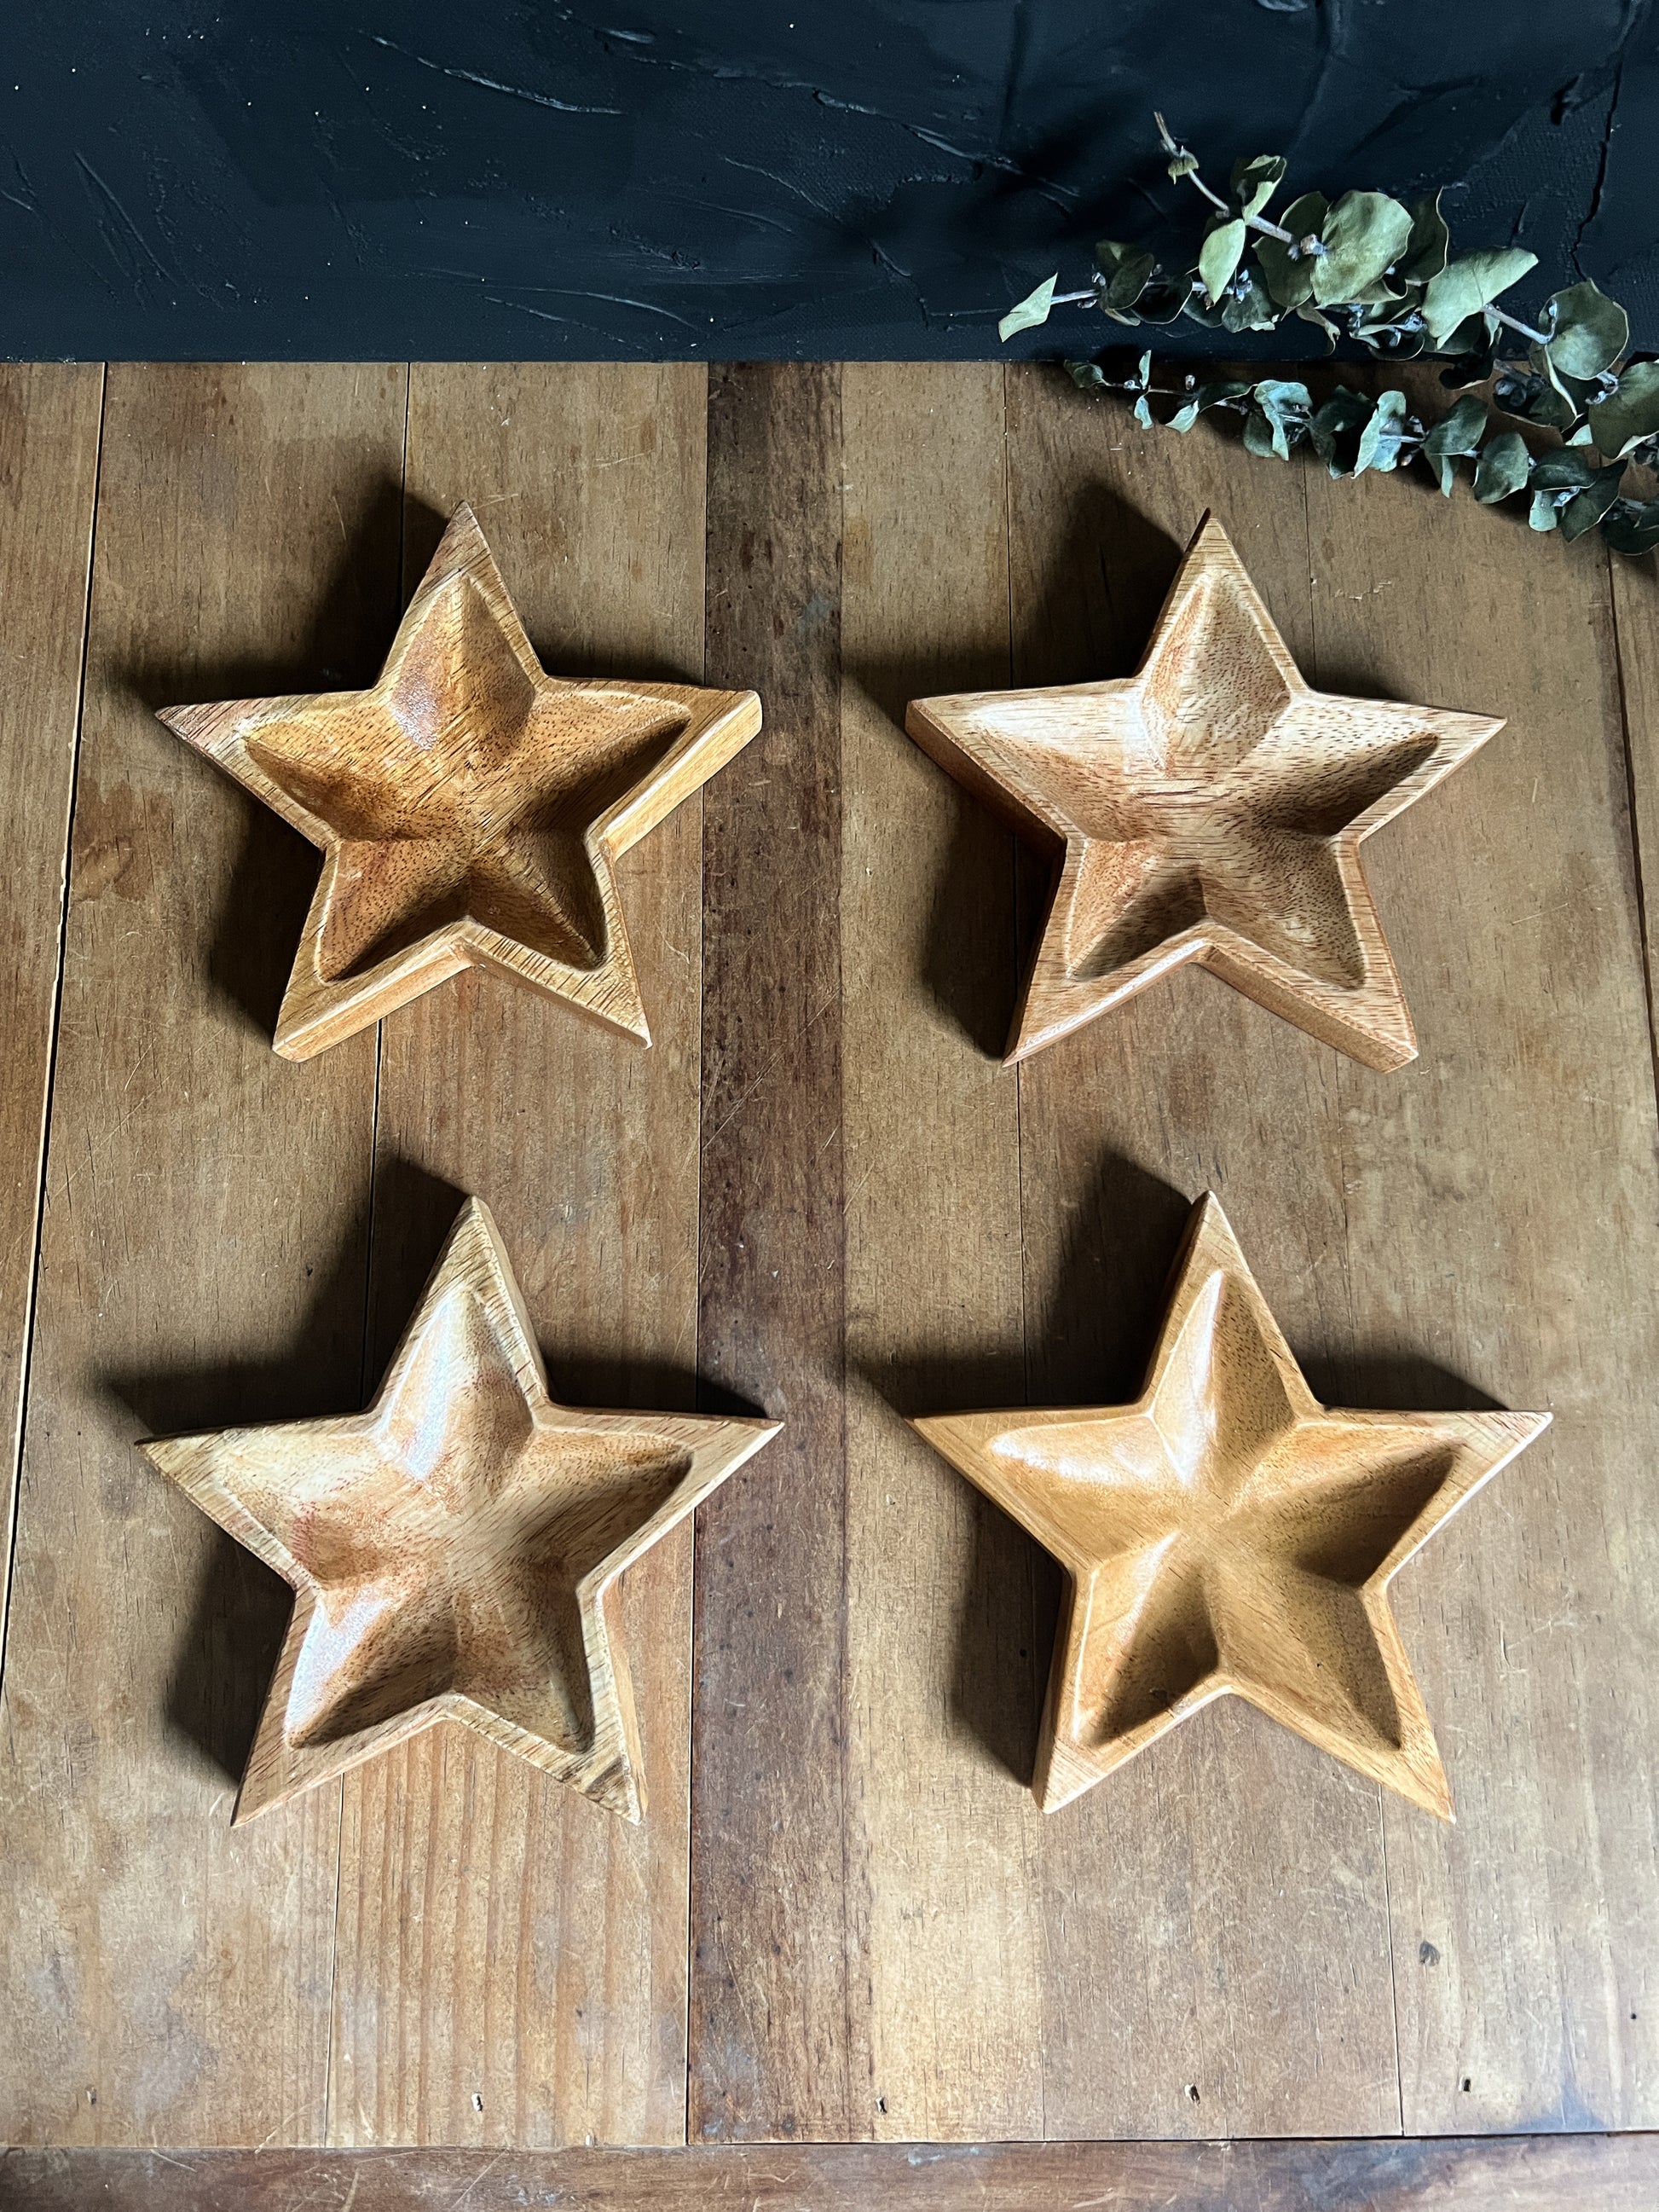 Wooden star-shaped dish perfect for holding small items like jewelry and crystals. 